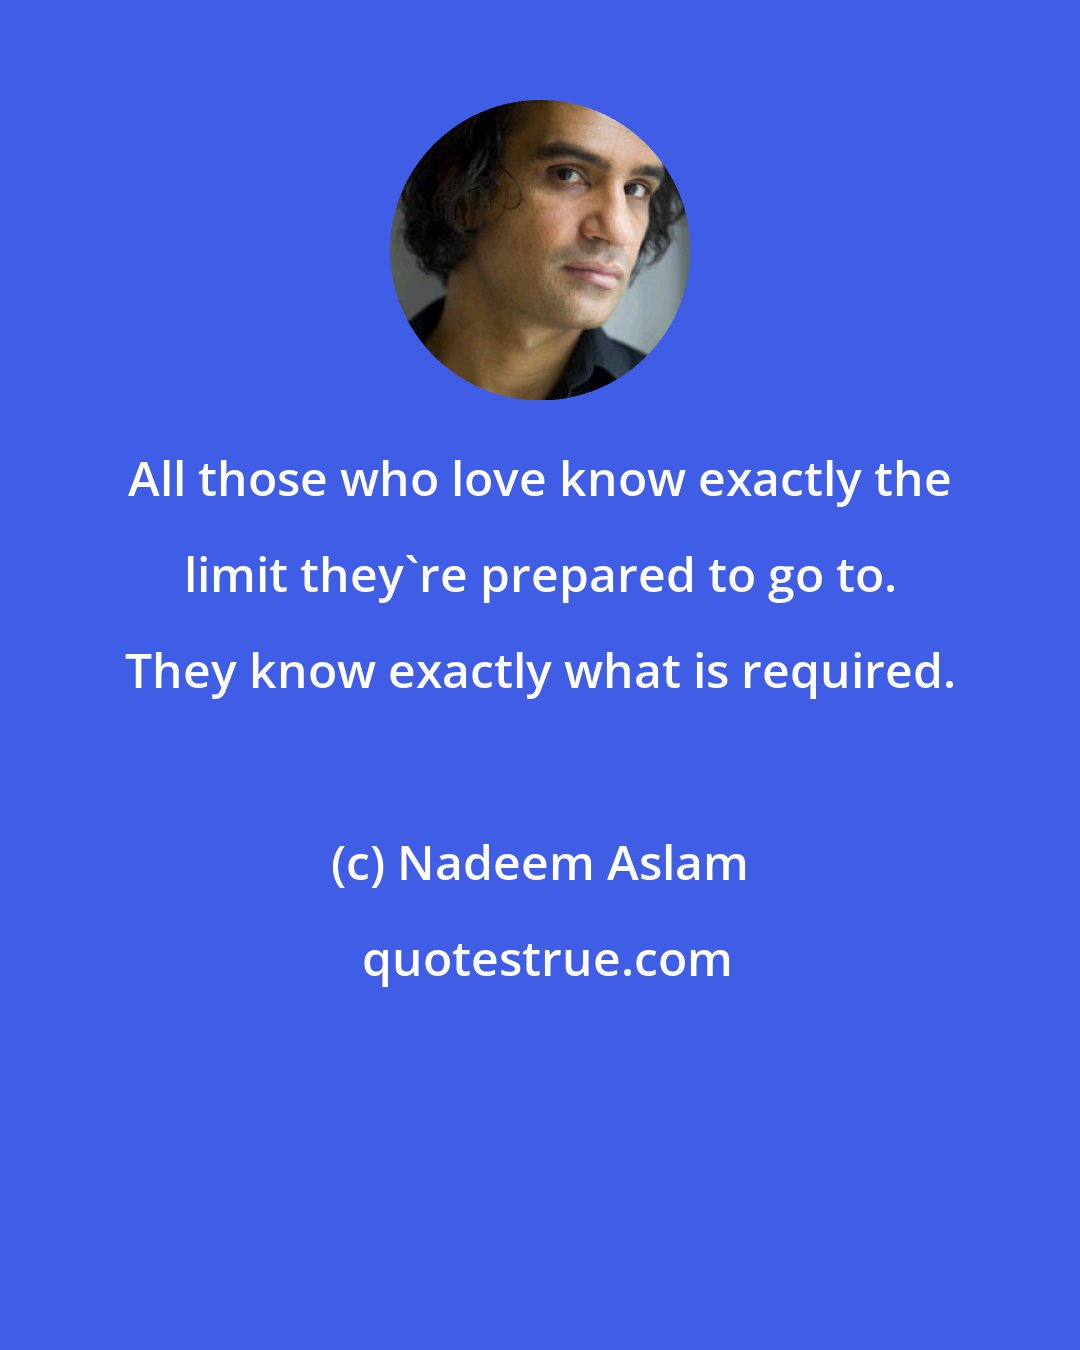 Nadeem Aslam: All those who love know exactly the limit they're prepared to go to. They know exactly what is required.